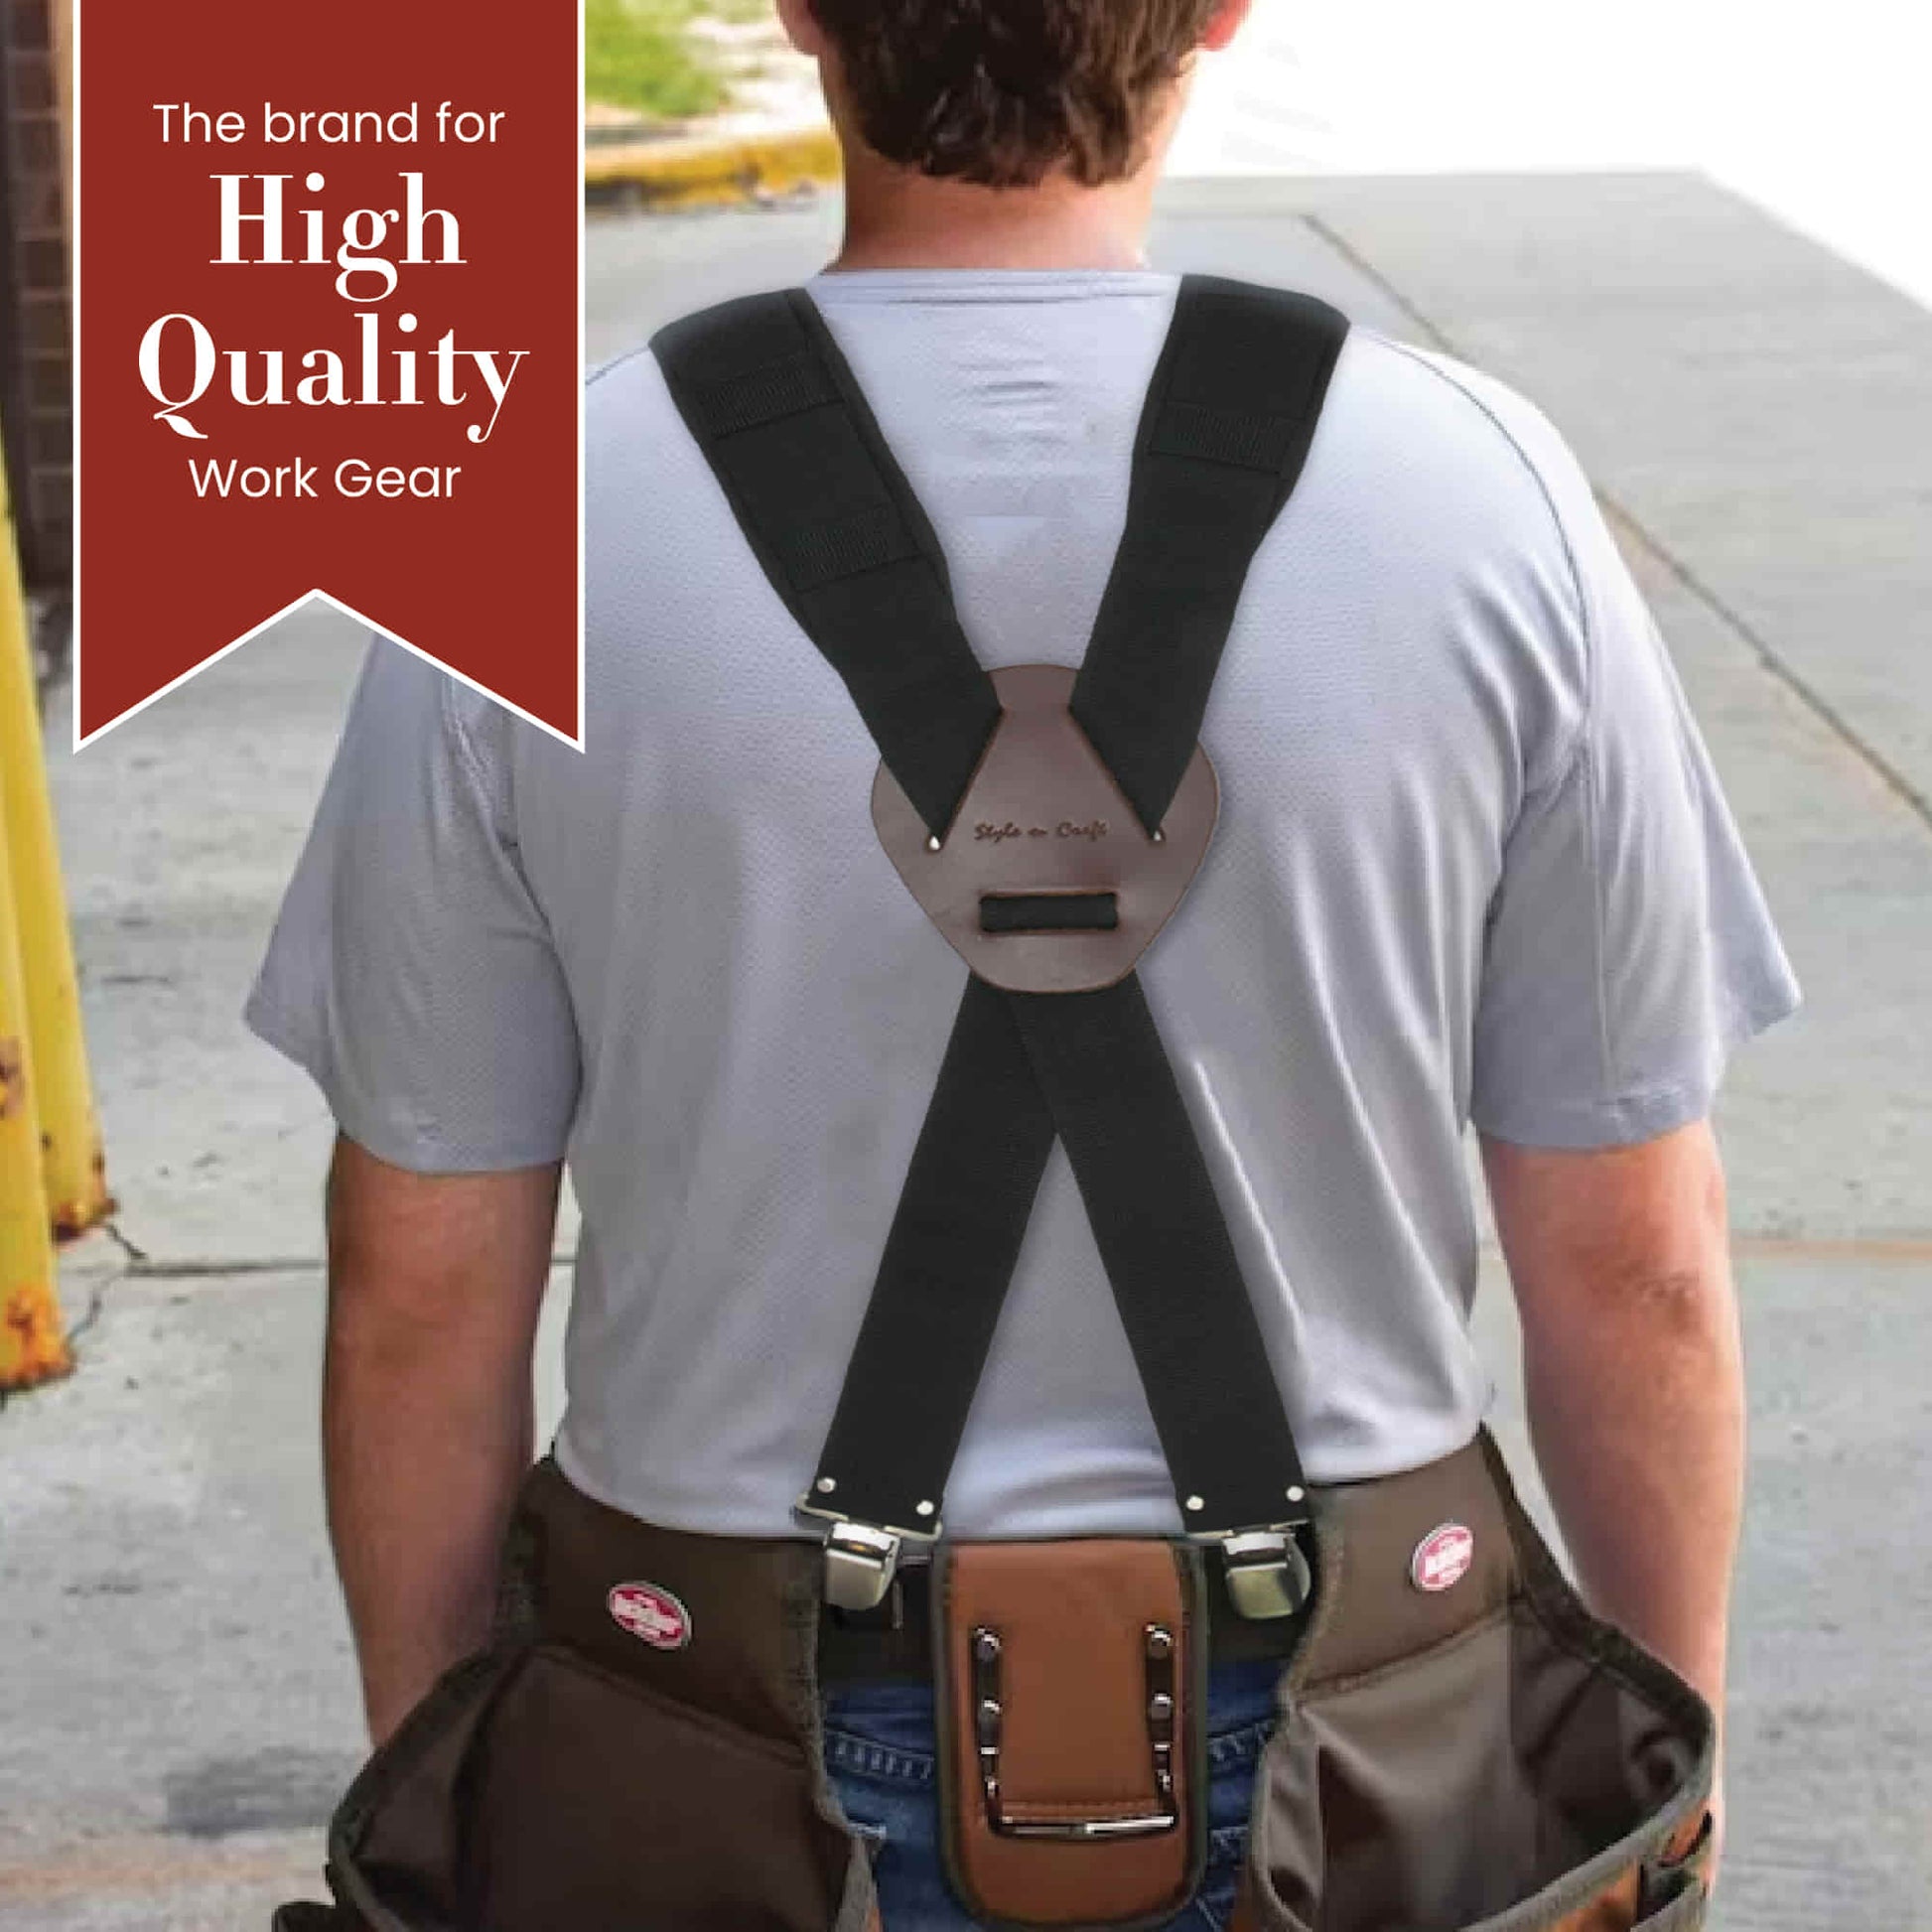 How To Adjust Stronghold® Suspenders - Occidental Leather